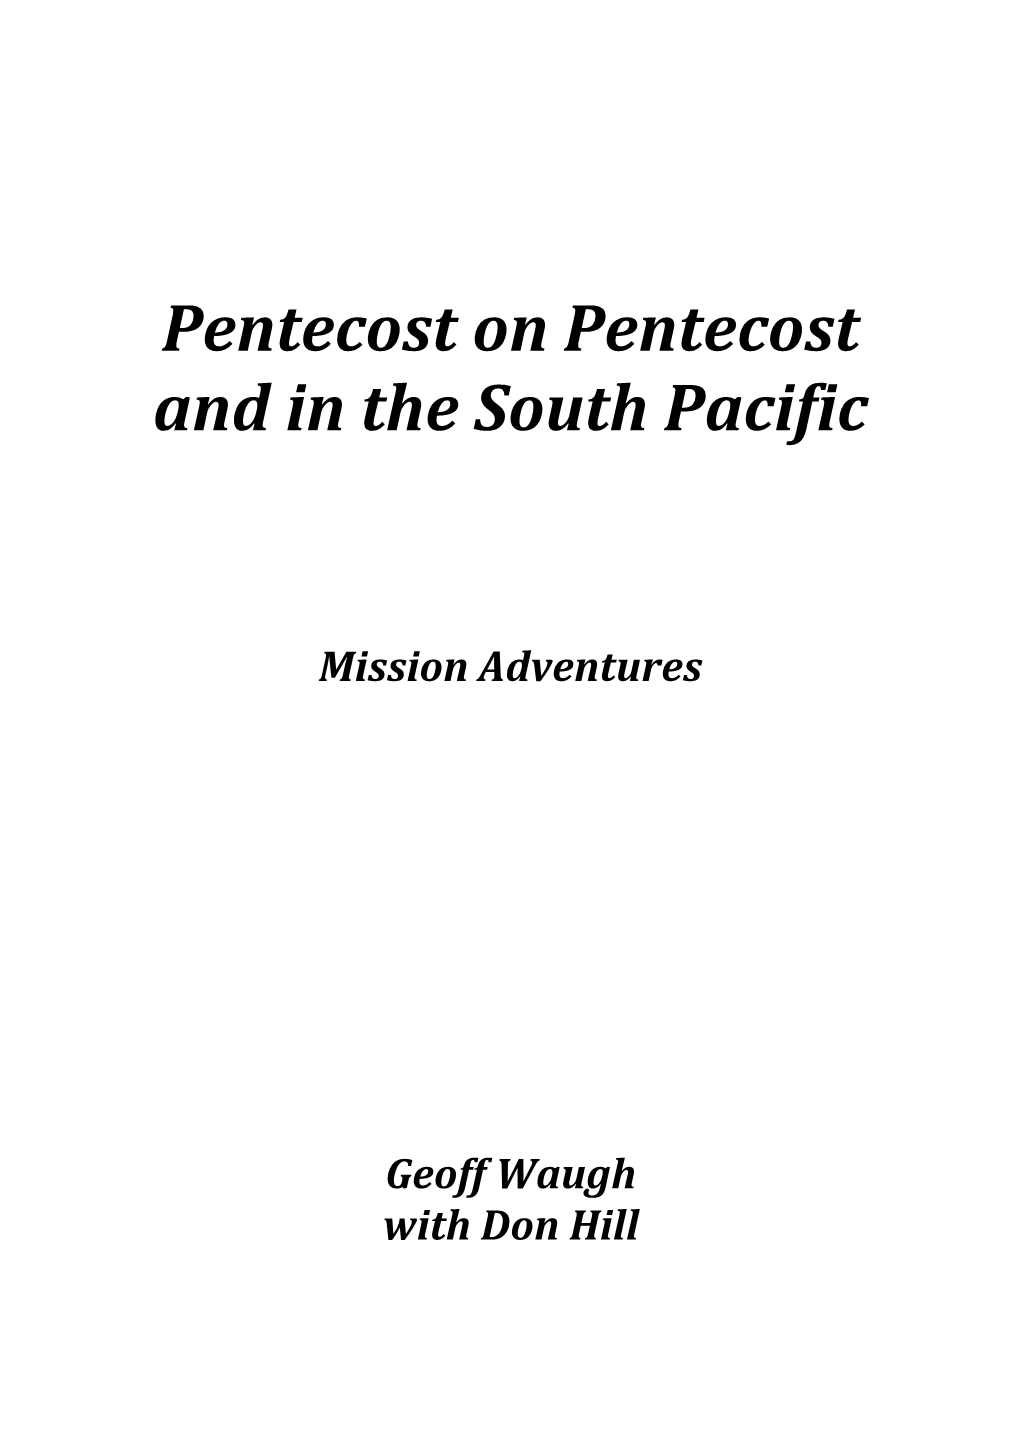 Pentecost on Pentecost and in the South Pacific